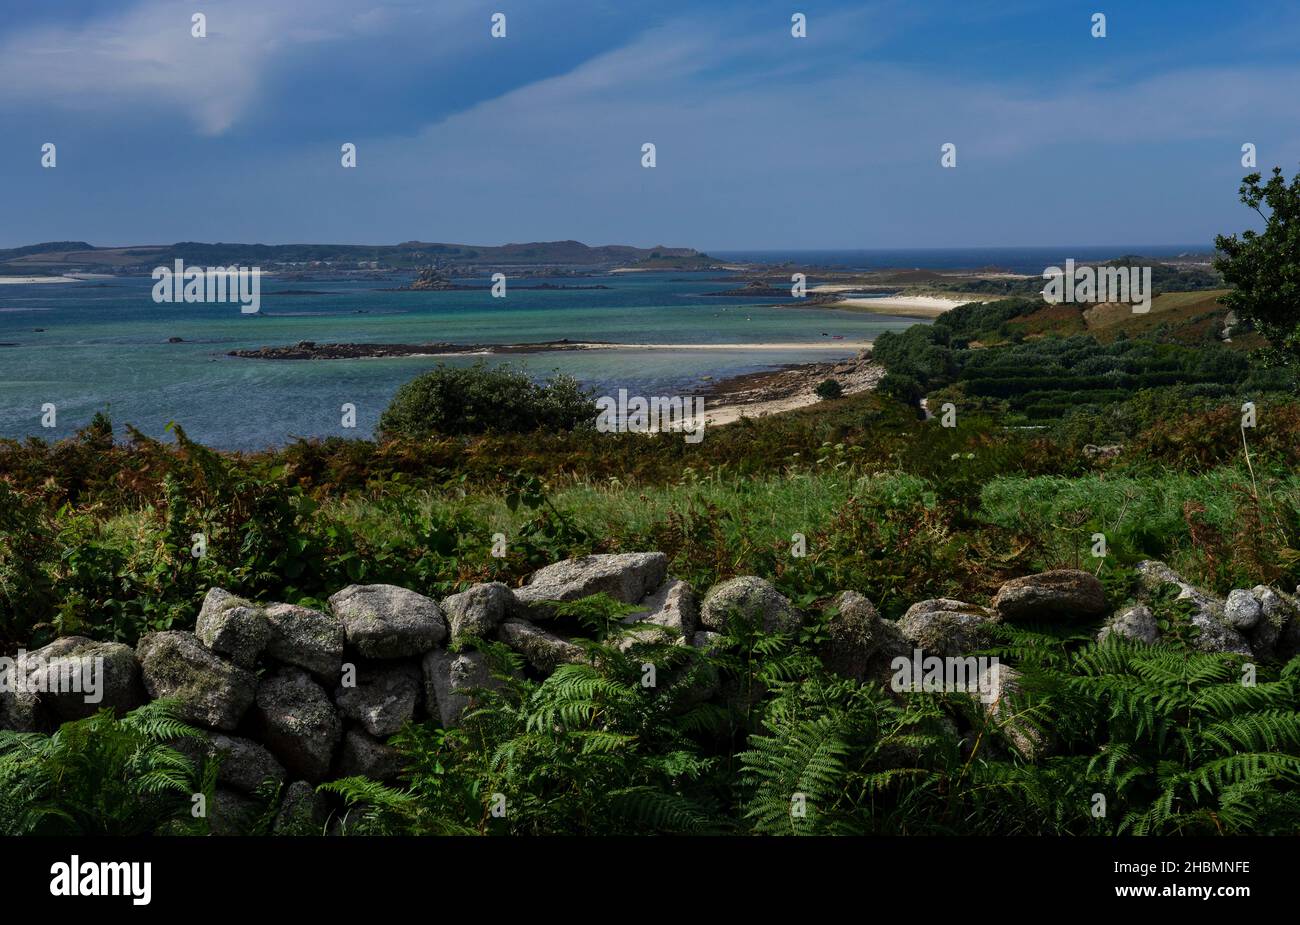 St. Martins, Isles of Scilly, England Stockfoto